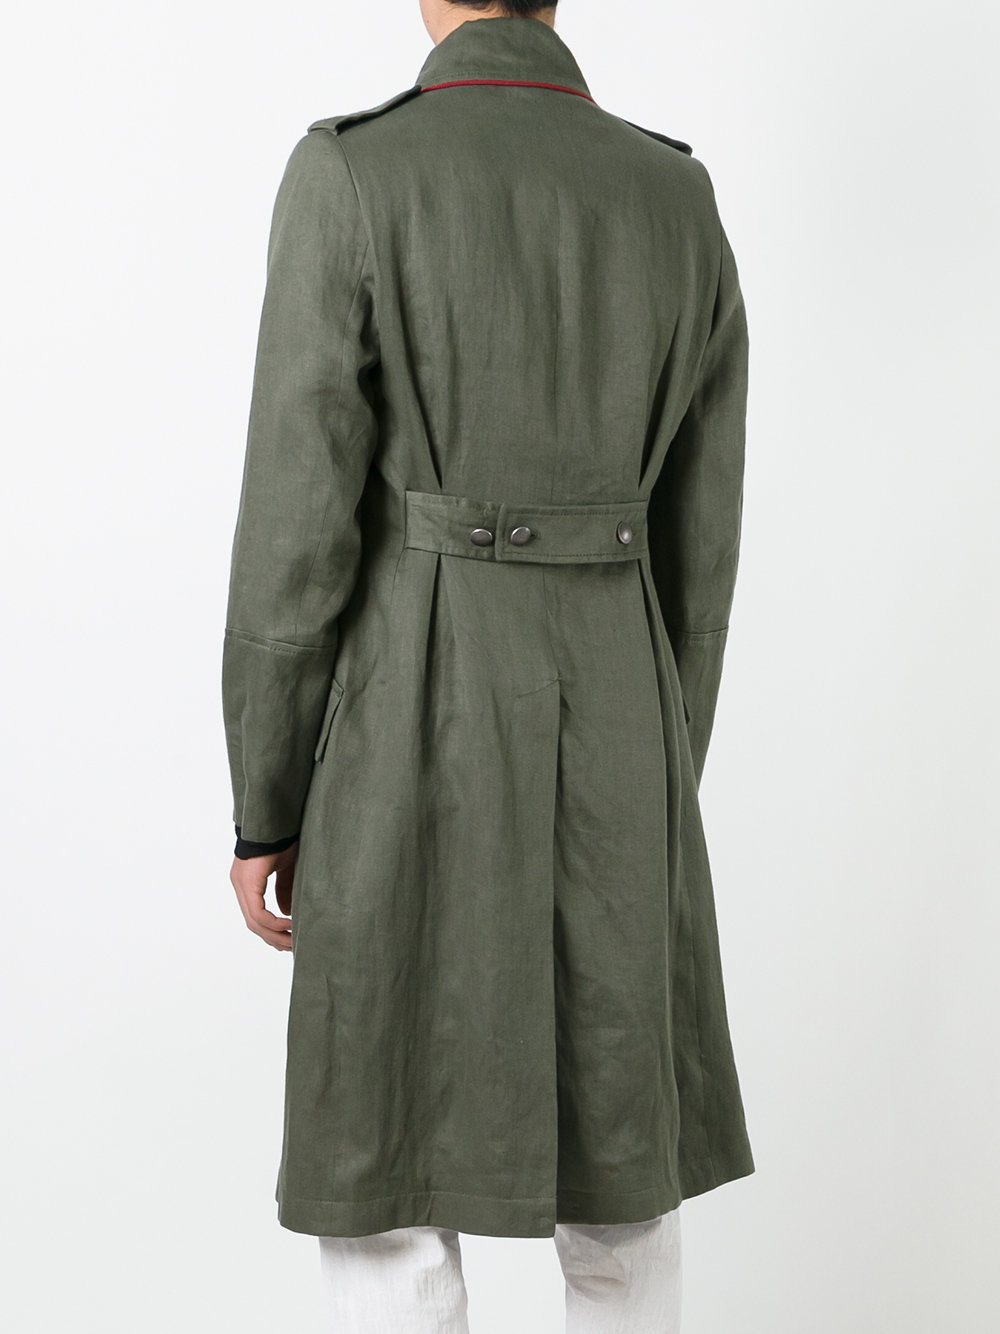 Ann Demeulemeester Double Breasted Military Coat Green, $910 | farfetch ...